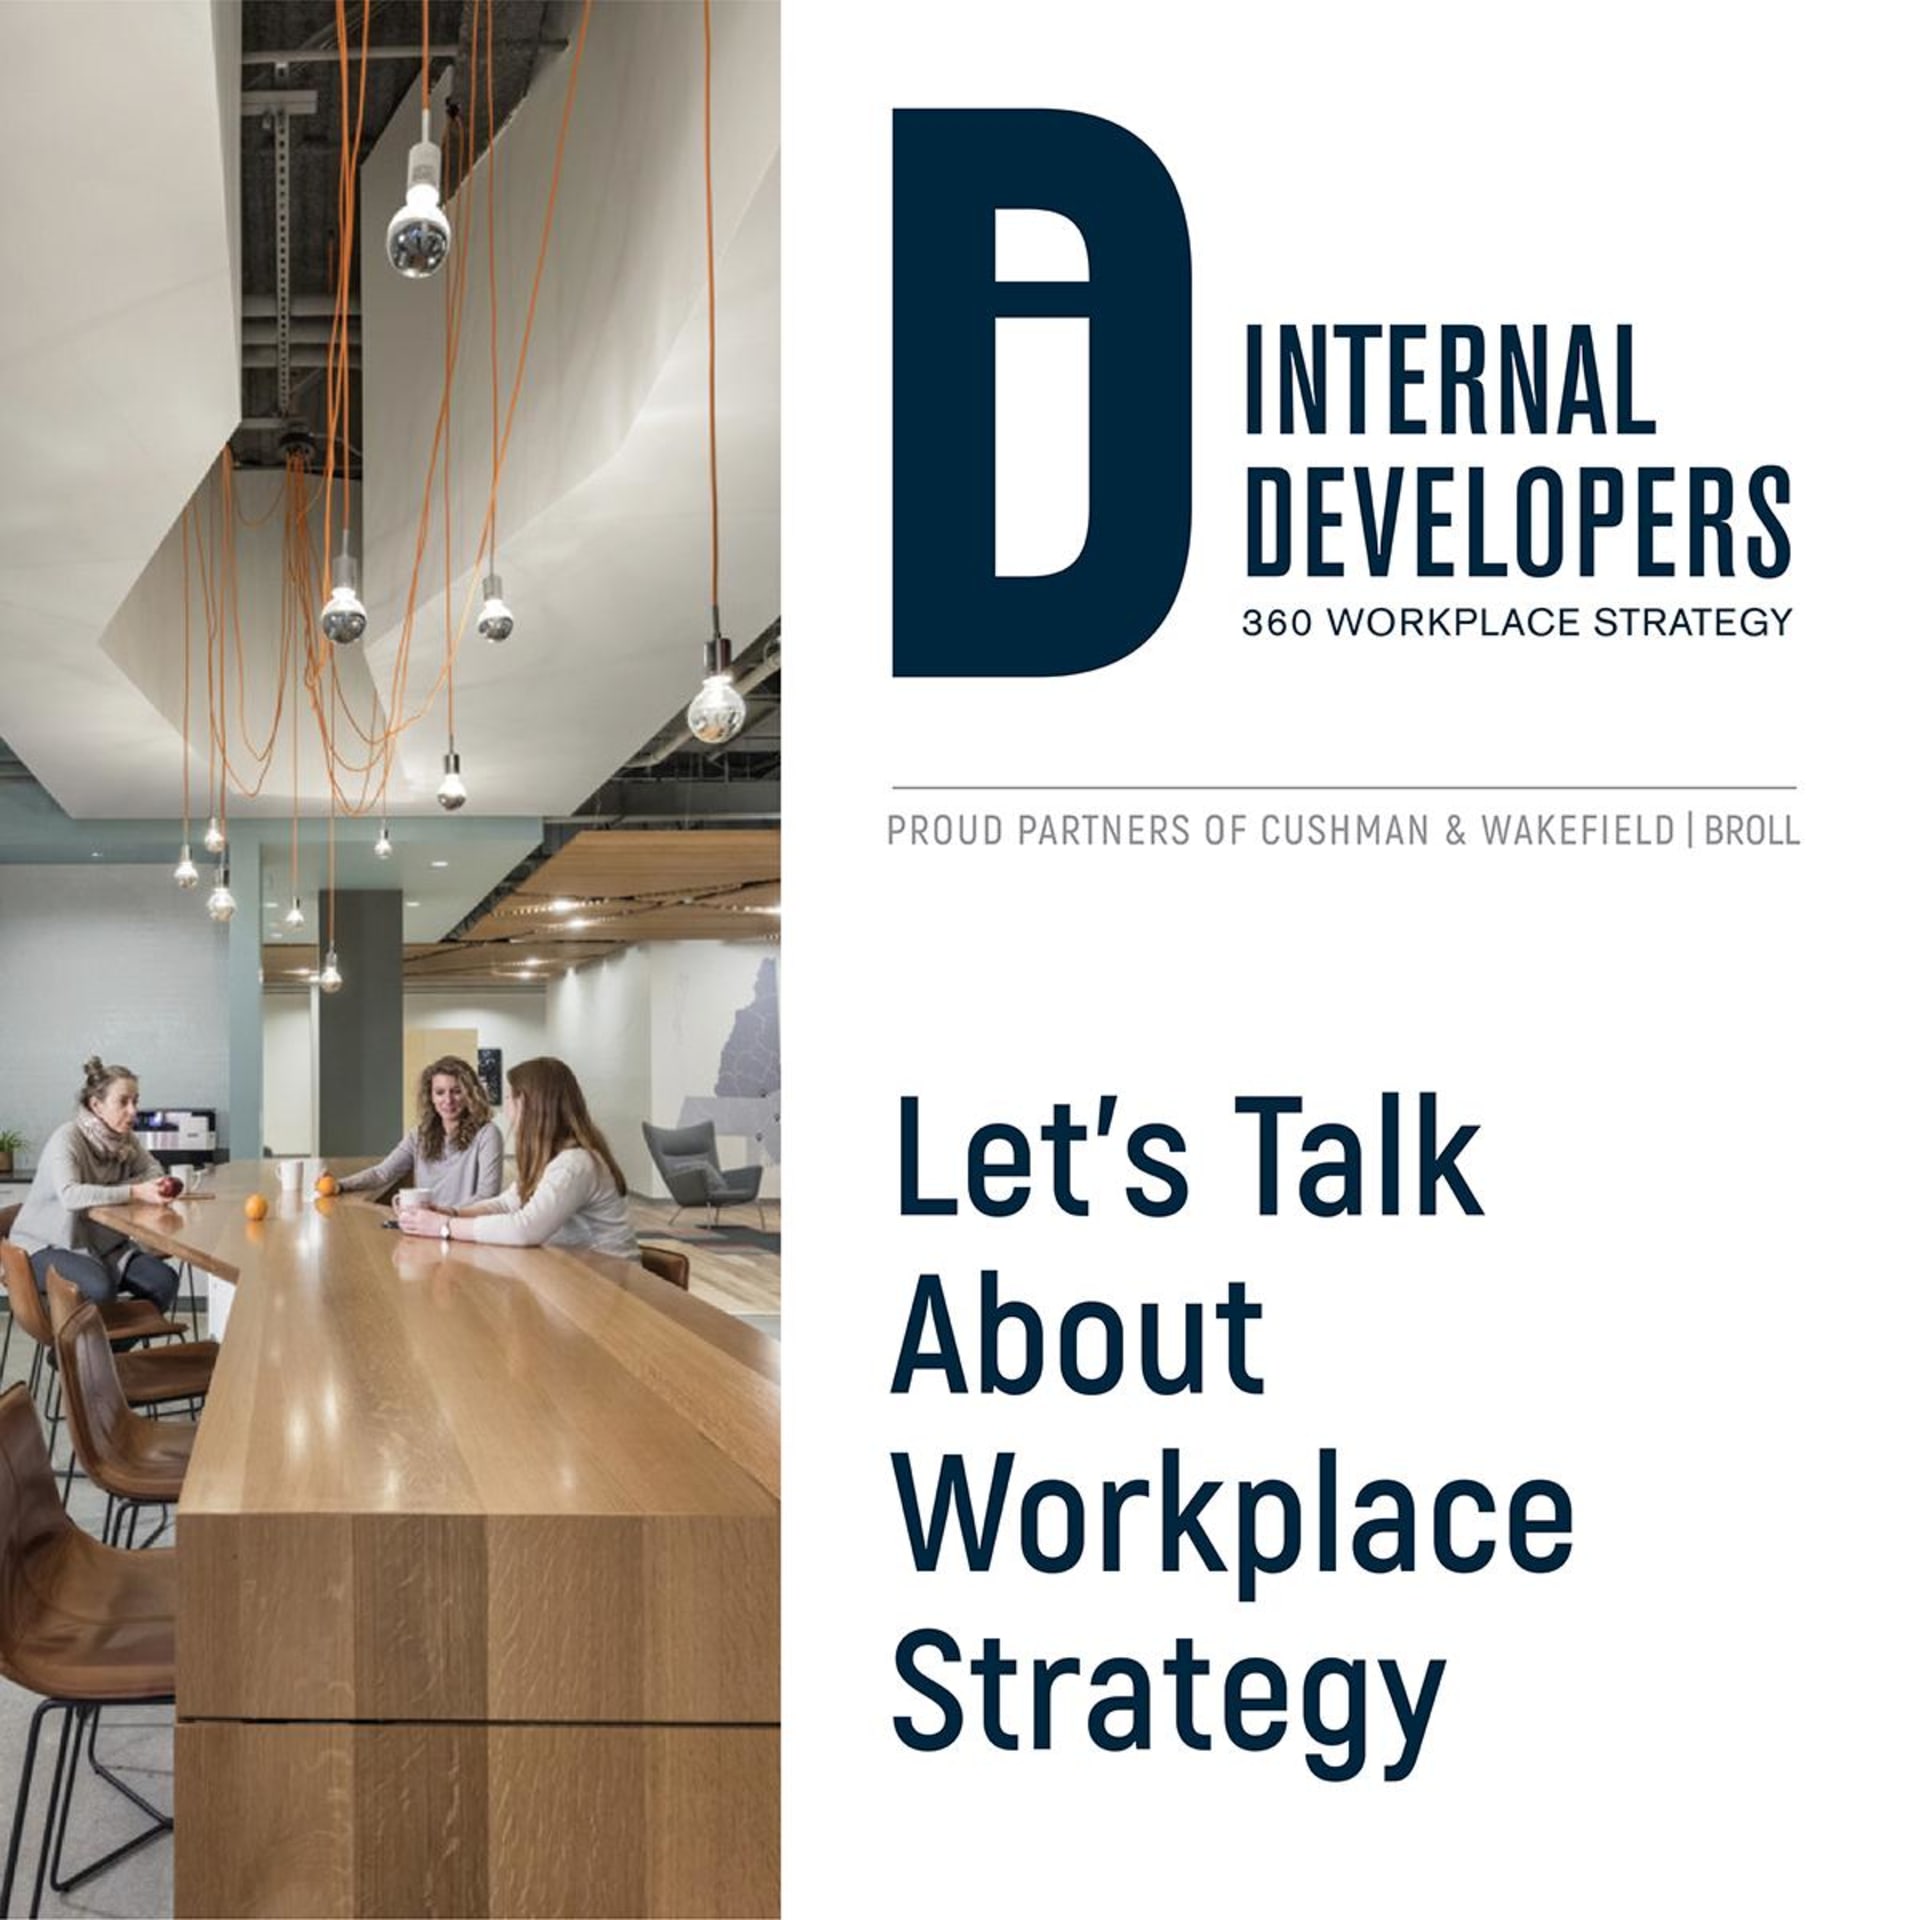 Let's Talk About Workplace Strategy